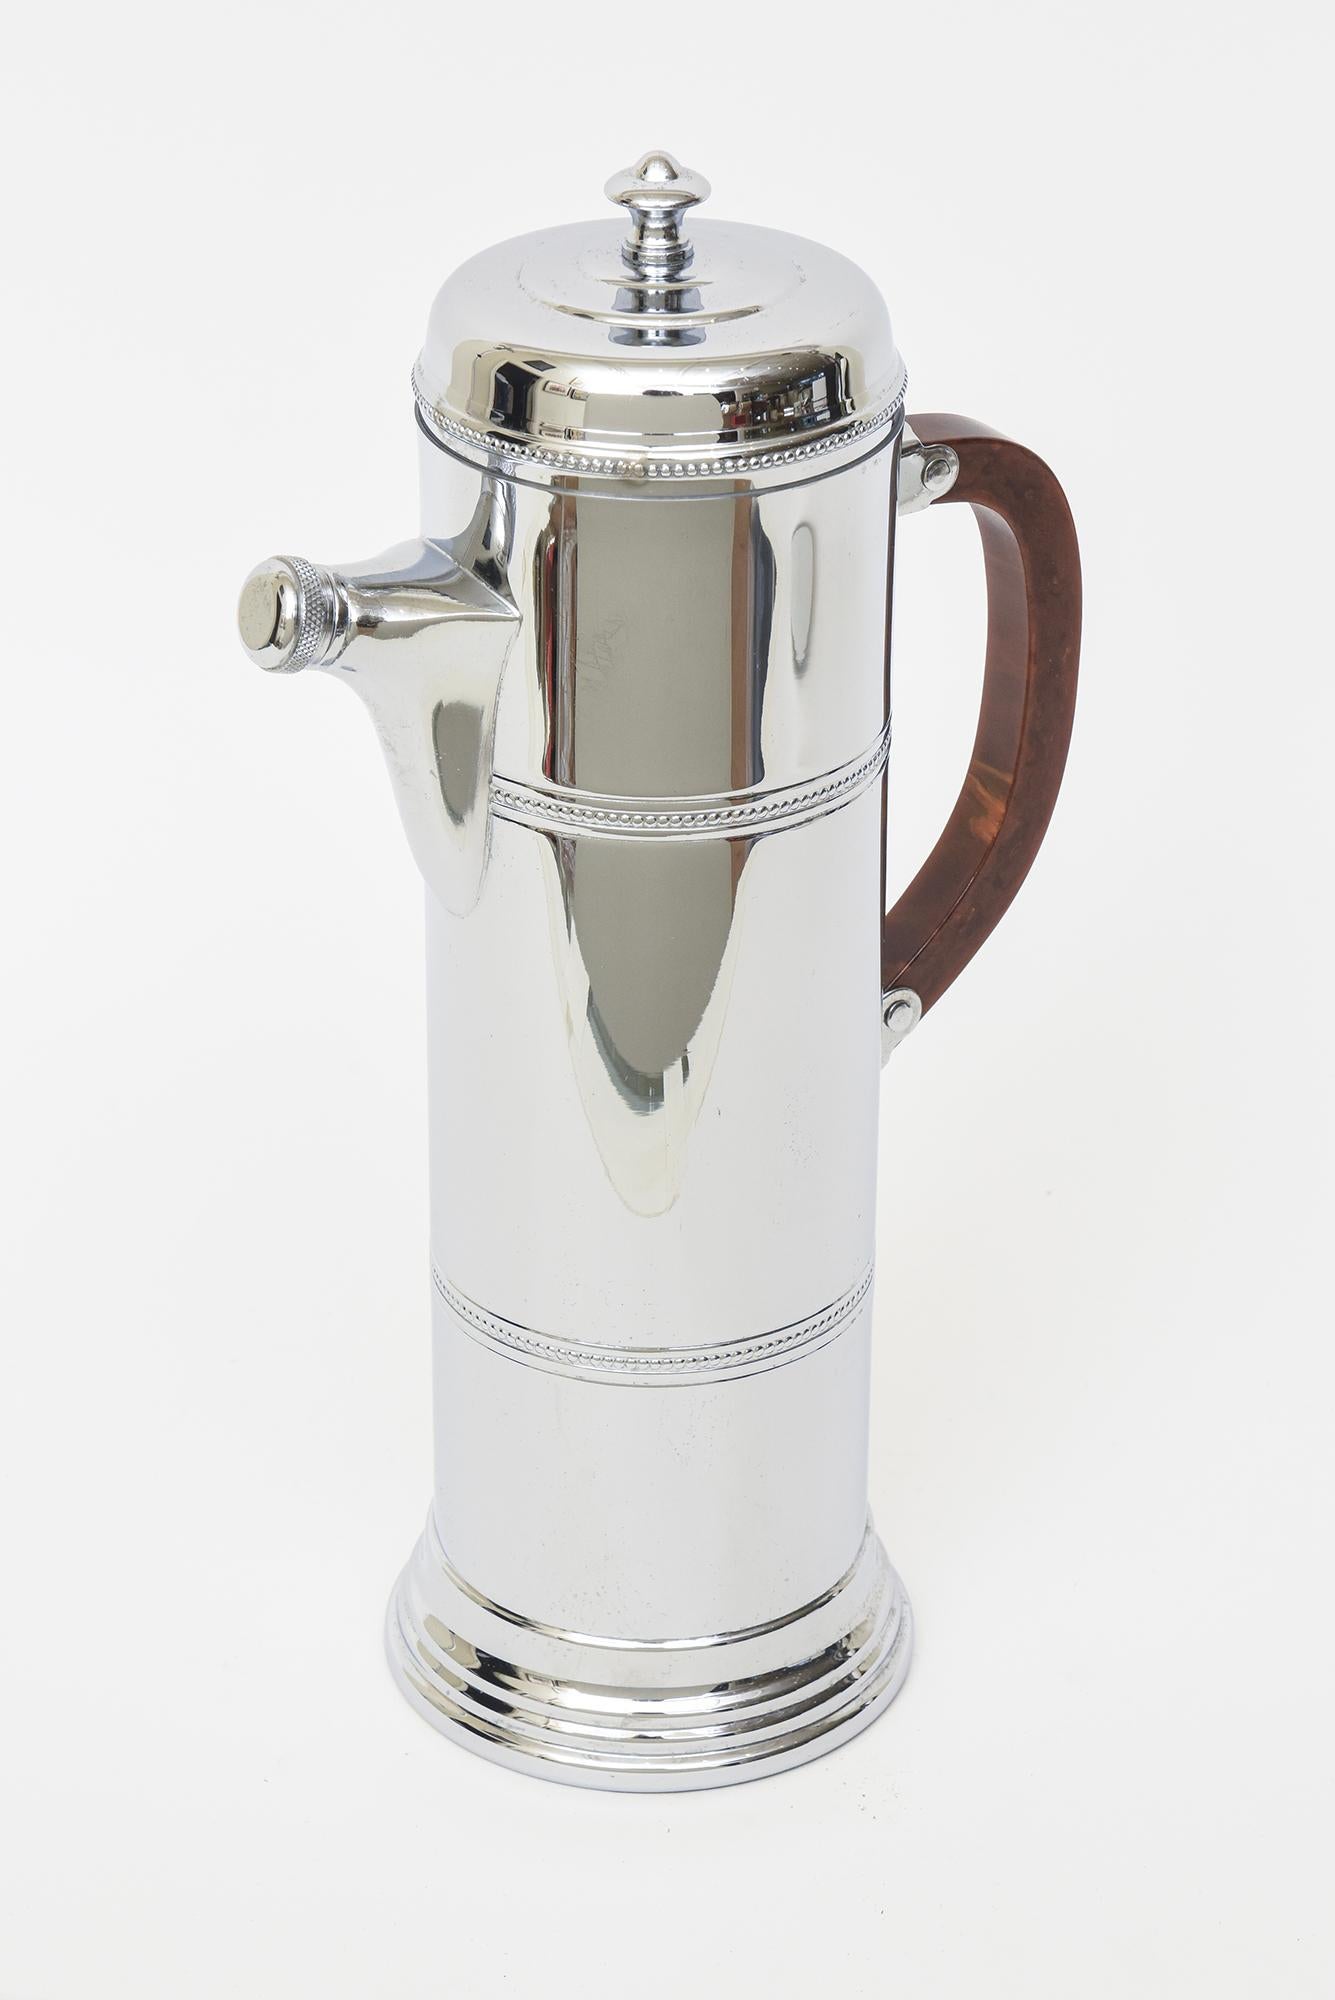 This great art deco moderne tall chrome cocktail shaker is from the 40's and has a great brown bakelite handle. It was polished to the best it can be. From side to side inclusive of the bakelite handle to the pouring spout it is 7.5